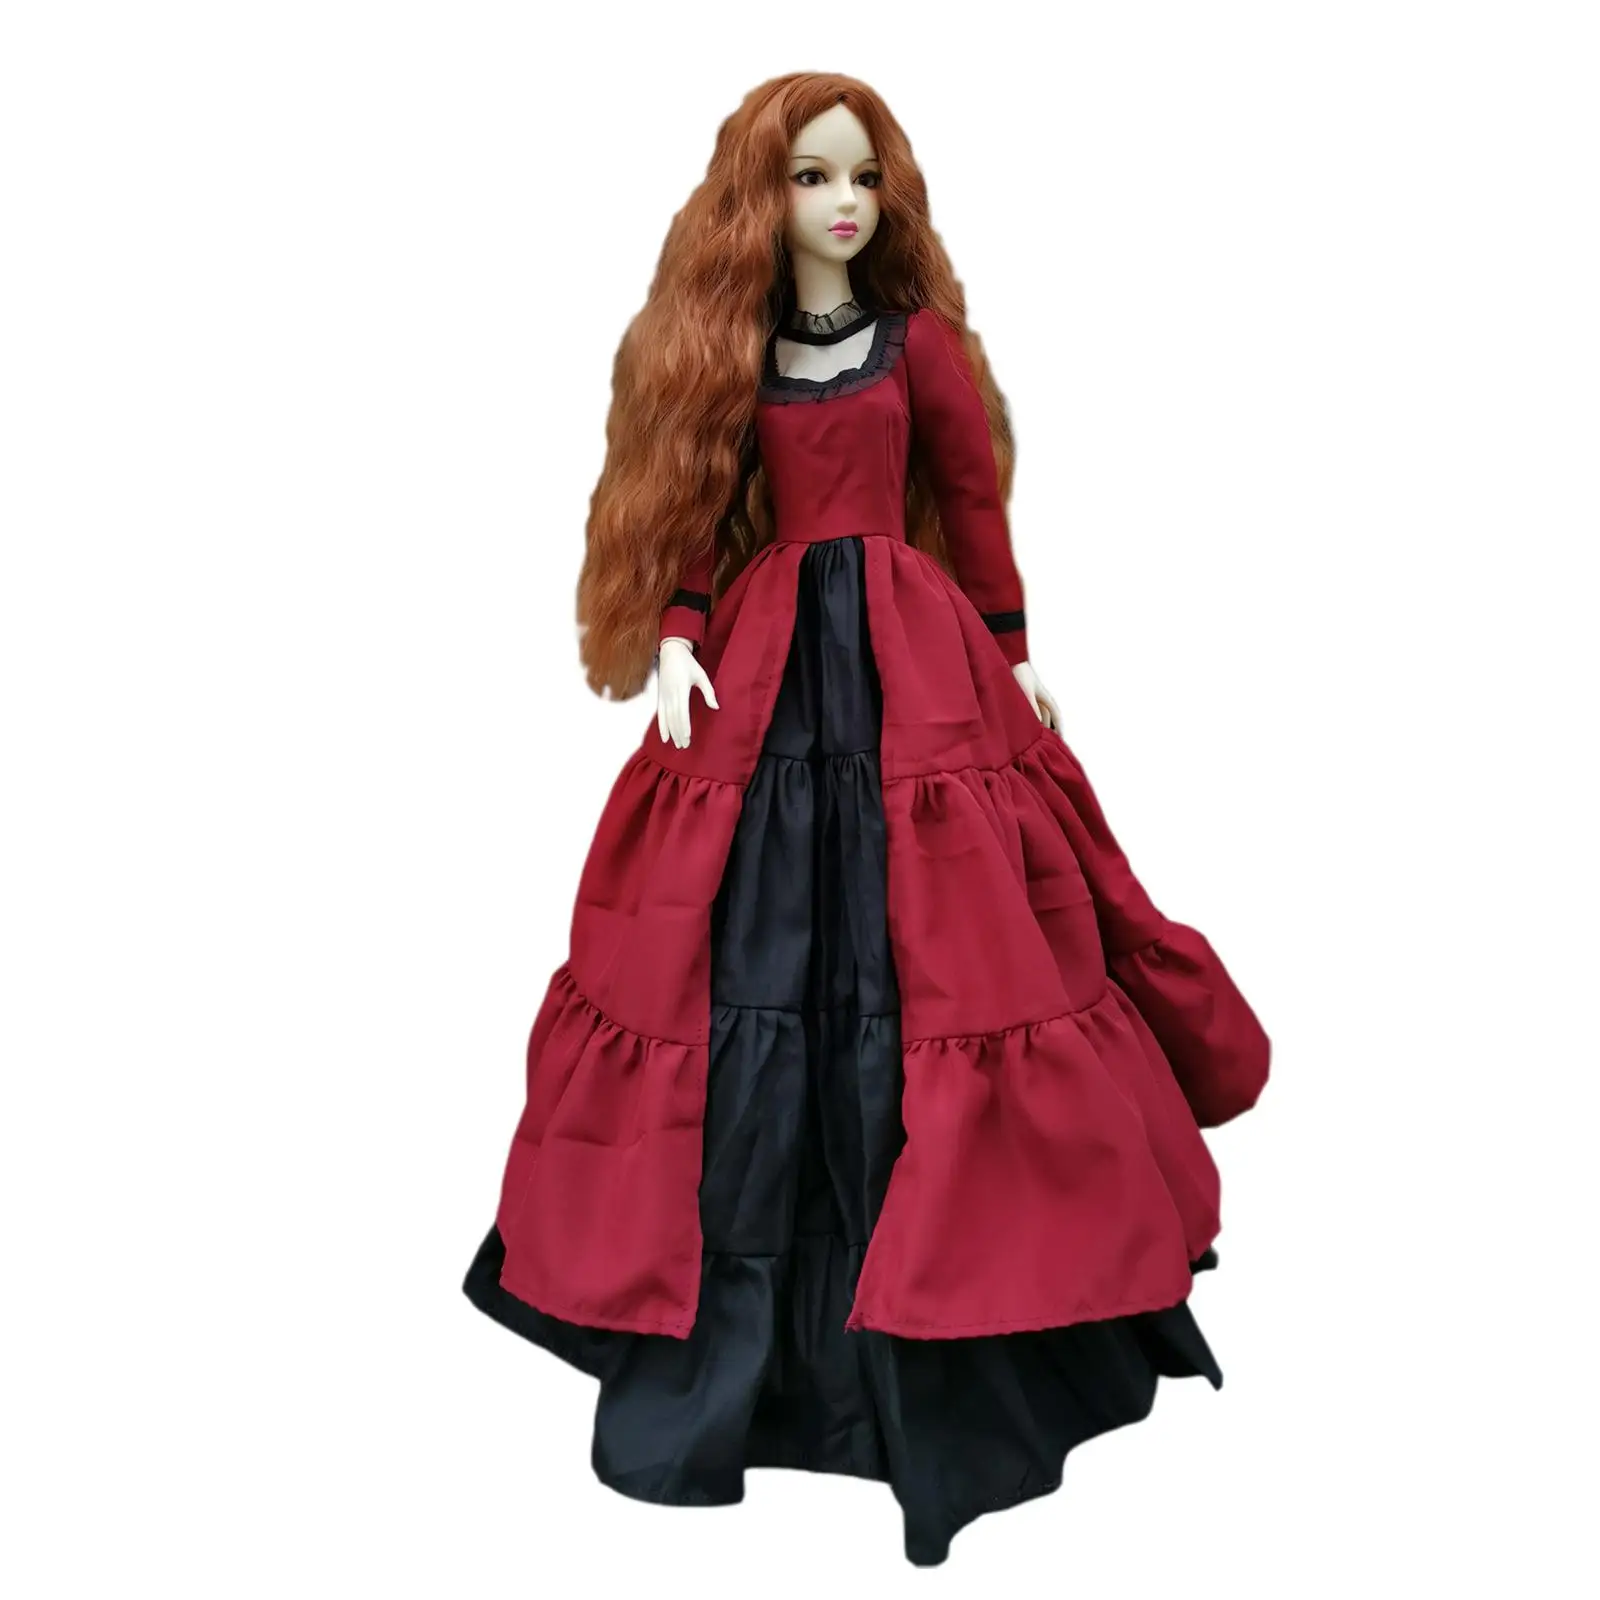 Ball Jointed Doll 1/3 Dolls with Beautiful Doll Clothes and Doll Fashion for Thanksgiving Women